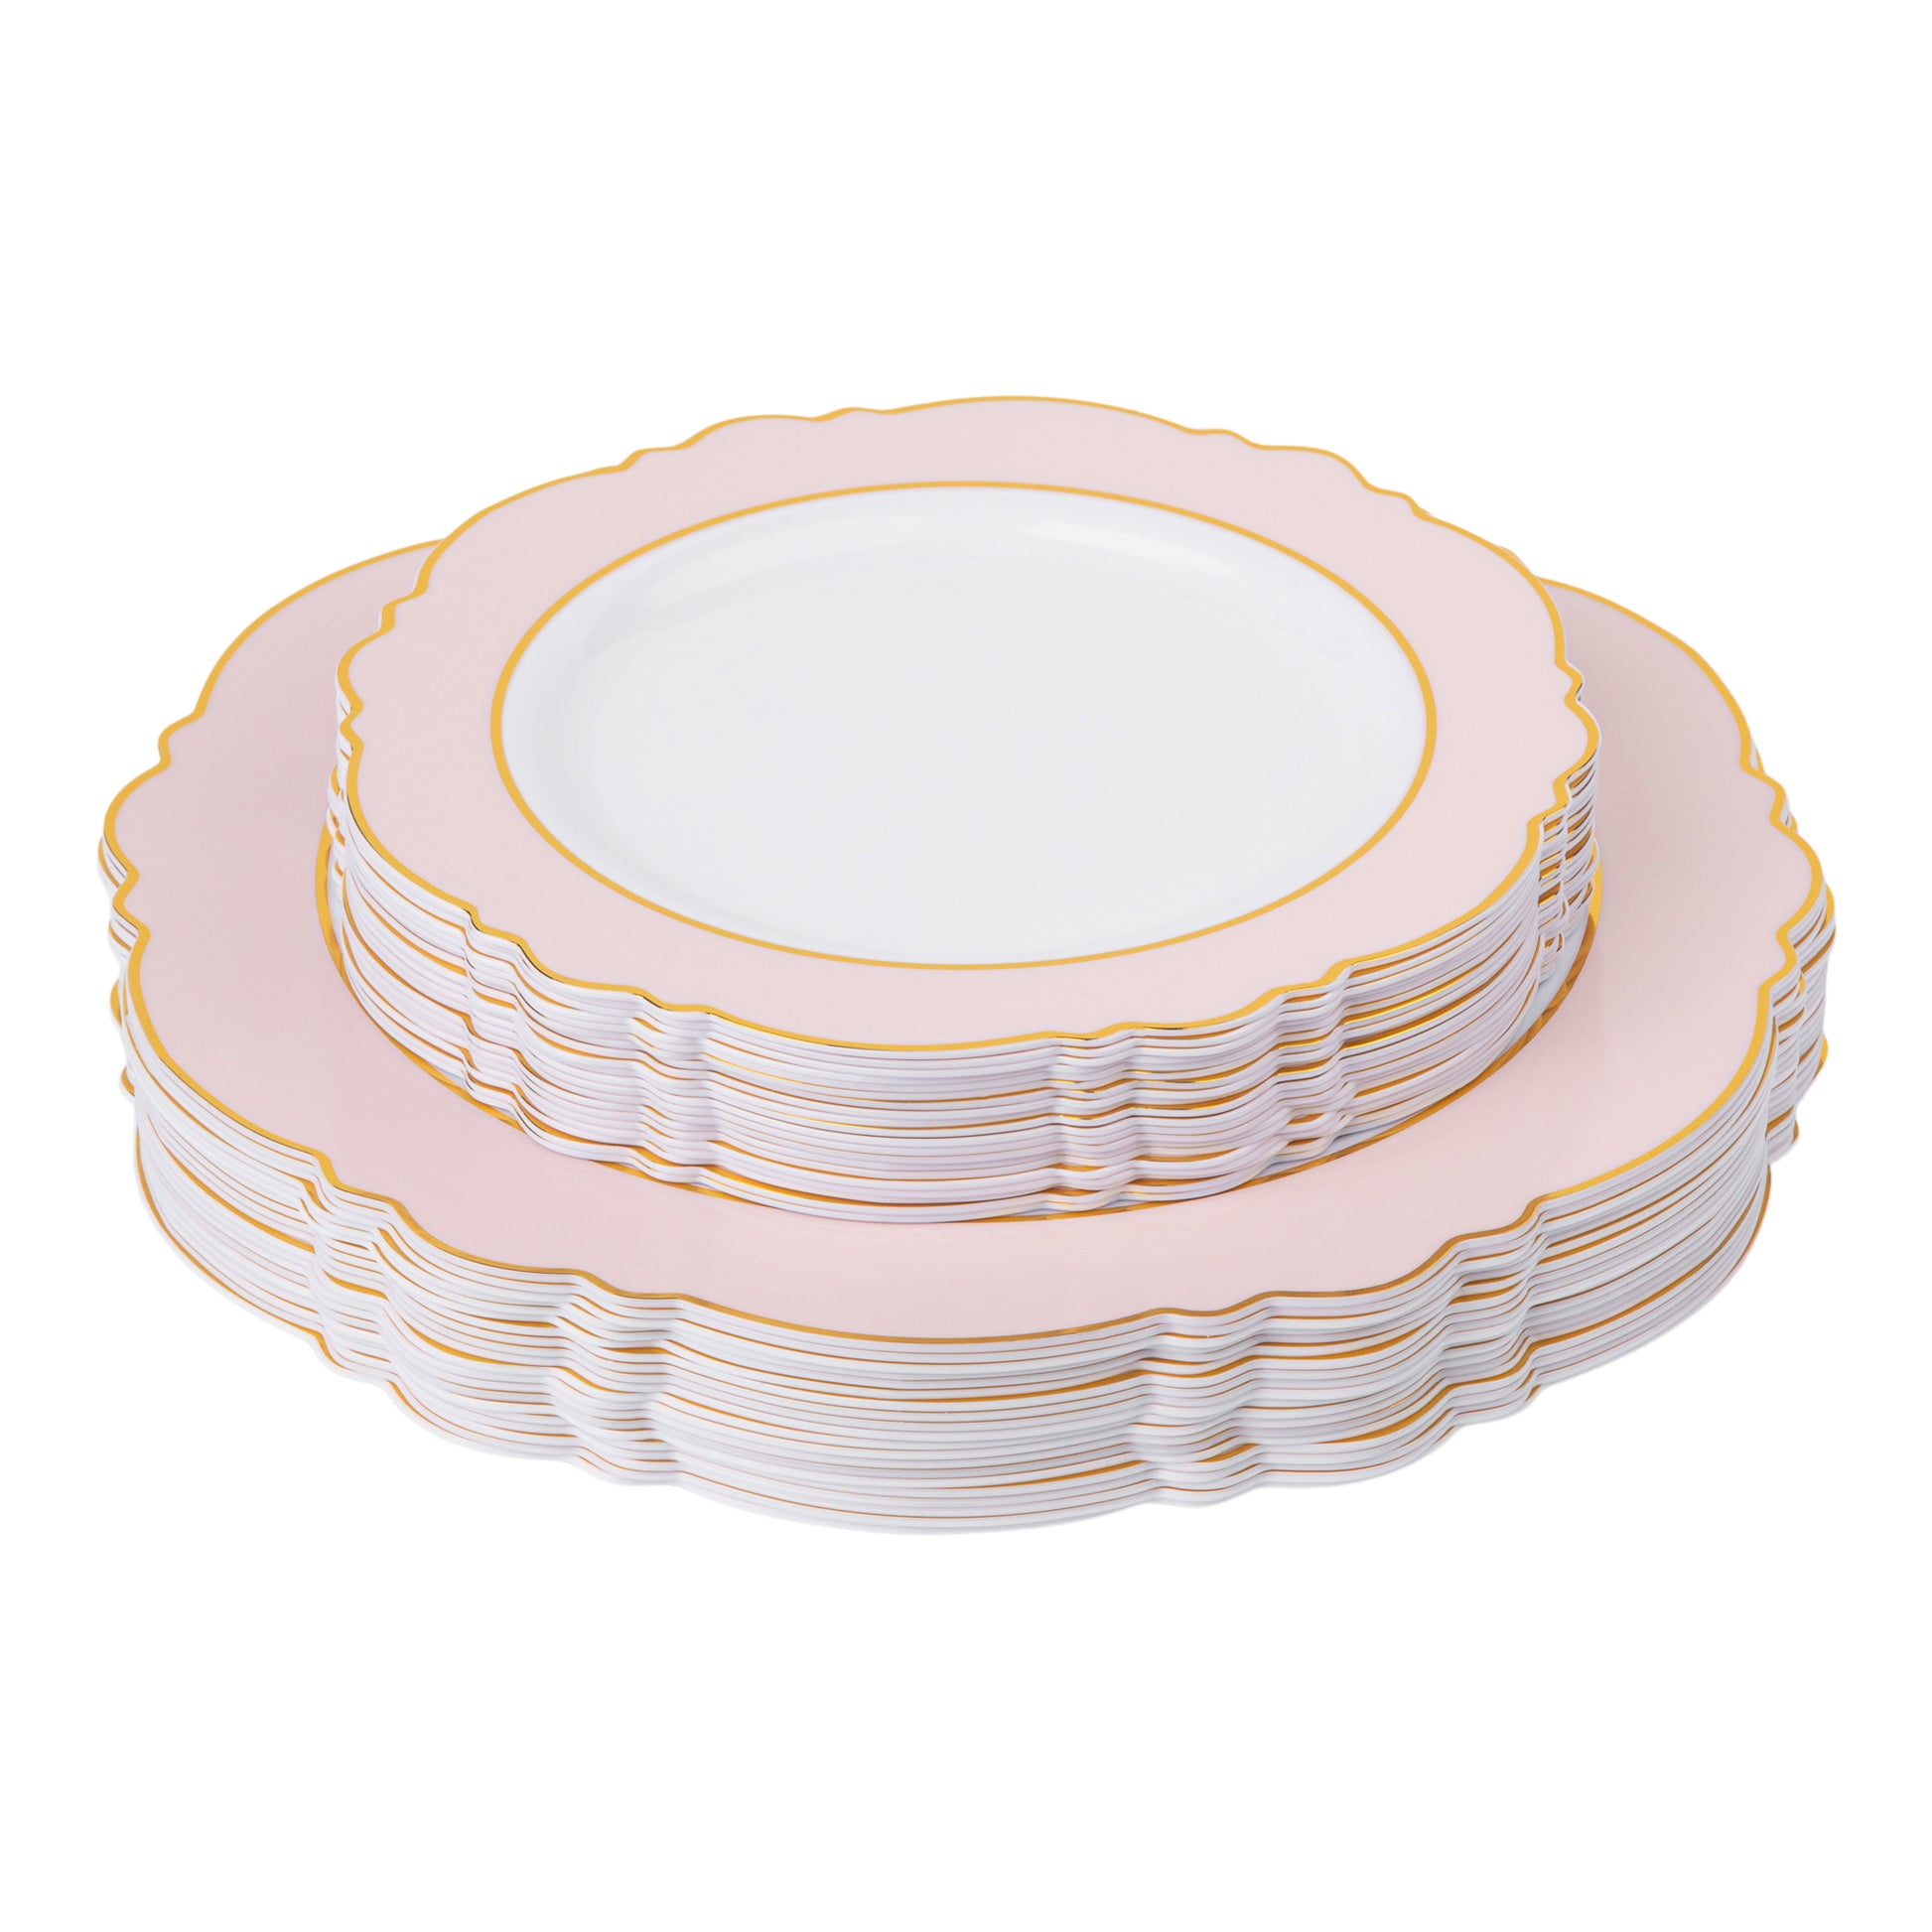 https://www.cvlinens.com/cdn/shop/products/Scallop-Disposable-Plastic-Plates-40-Pieces-Combo-Pack-Pink-Gold-Trimmed.jpg?v=1614697701&width=1946